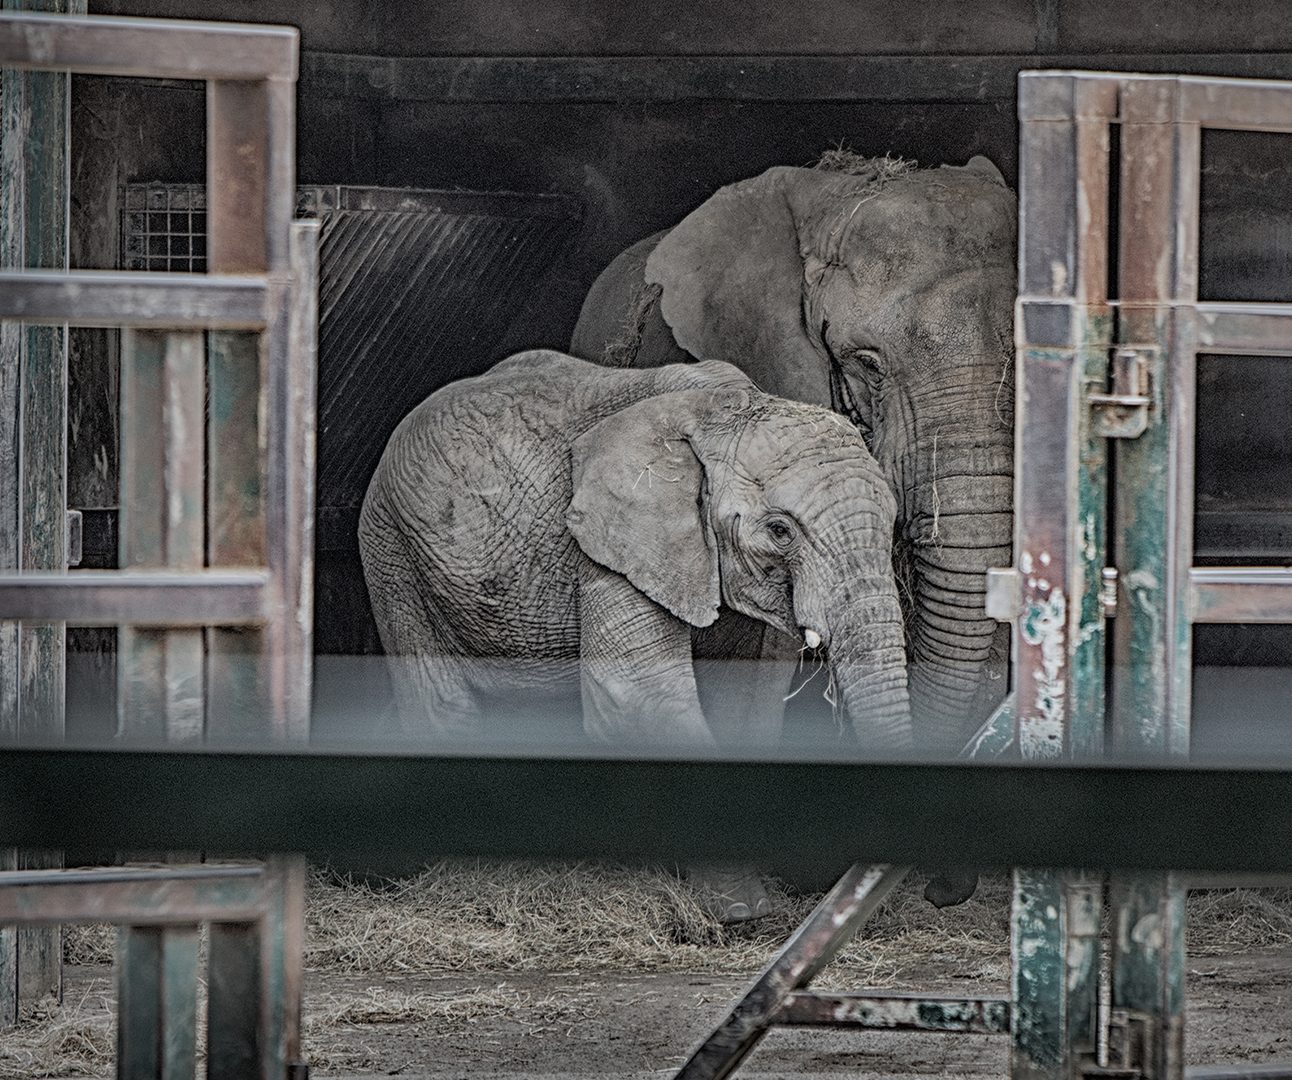 Two elephants in a captive enclosure